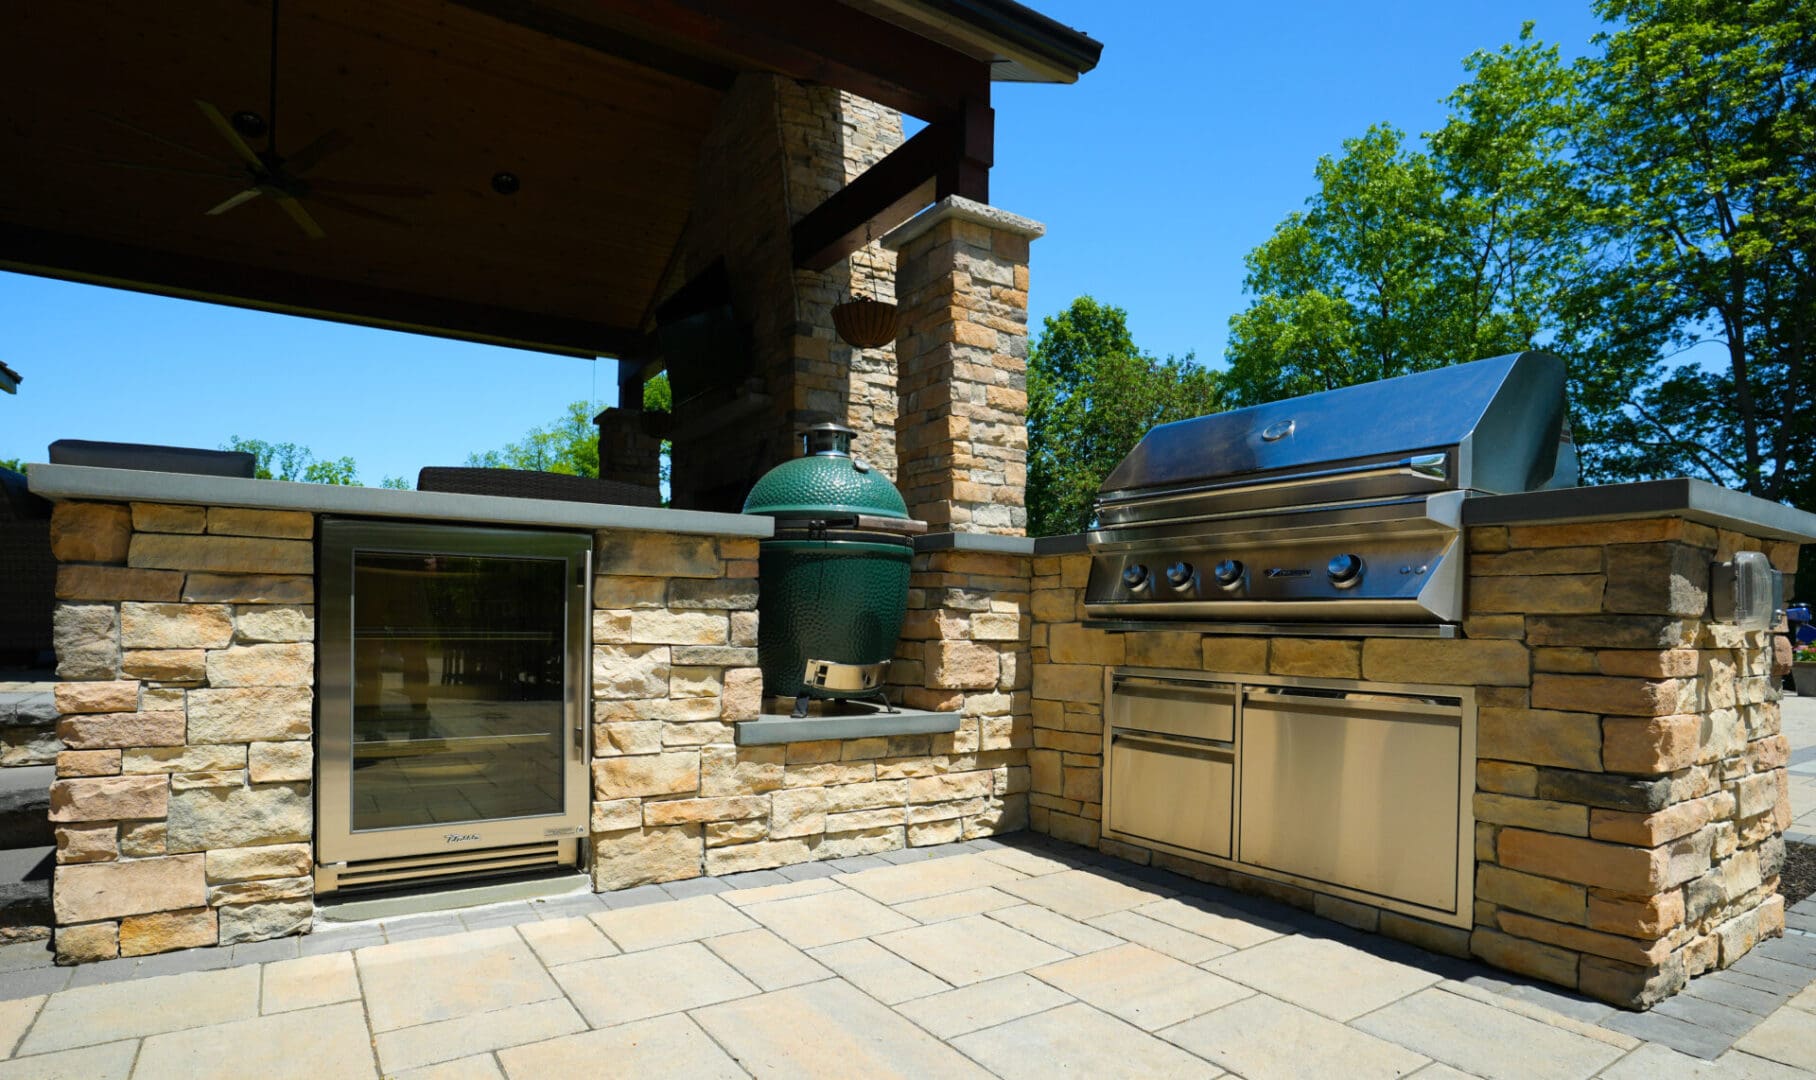 A custom outdoor kitchen with a grill and sink.